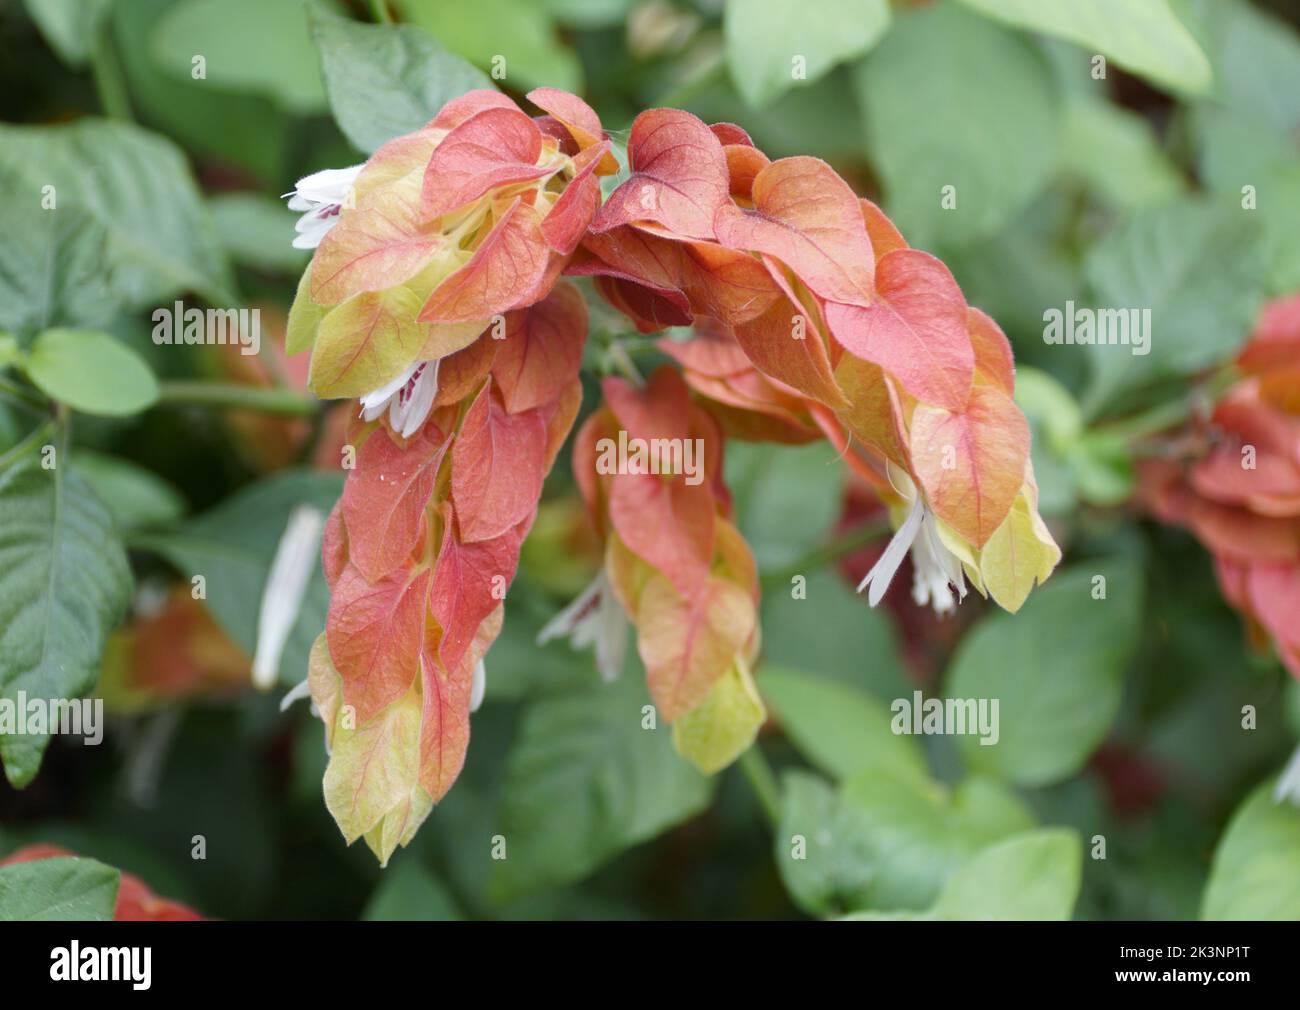 The unique shape and red flower of Shrimp plant with flowers that attracts hummingbirds Stock Photo